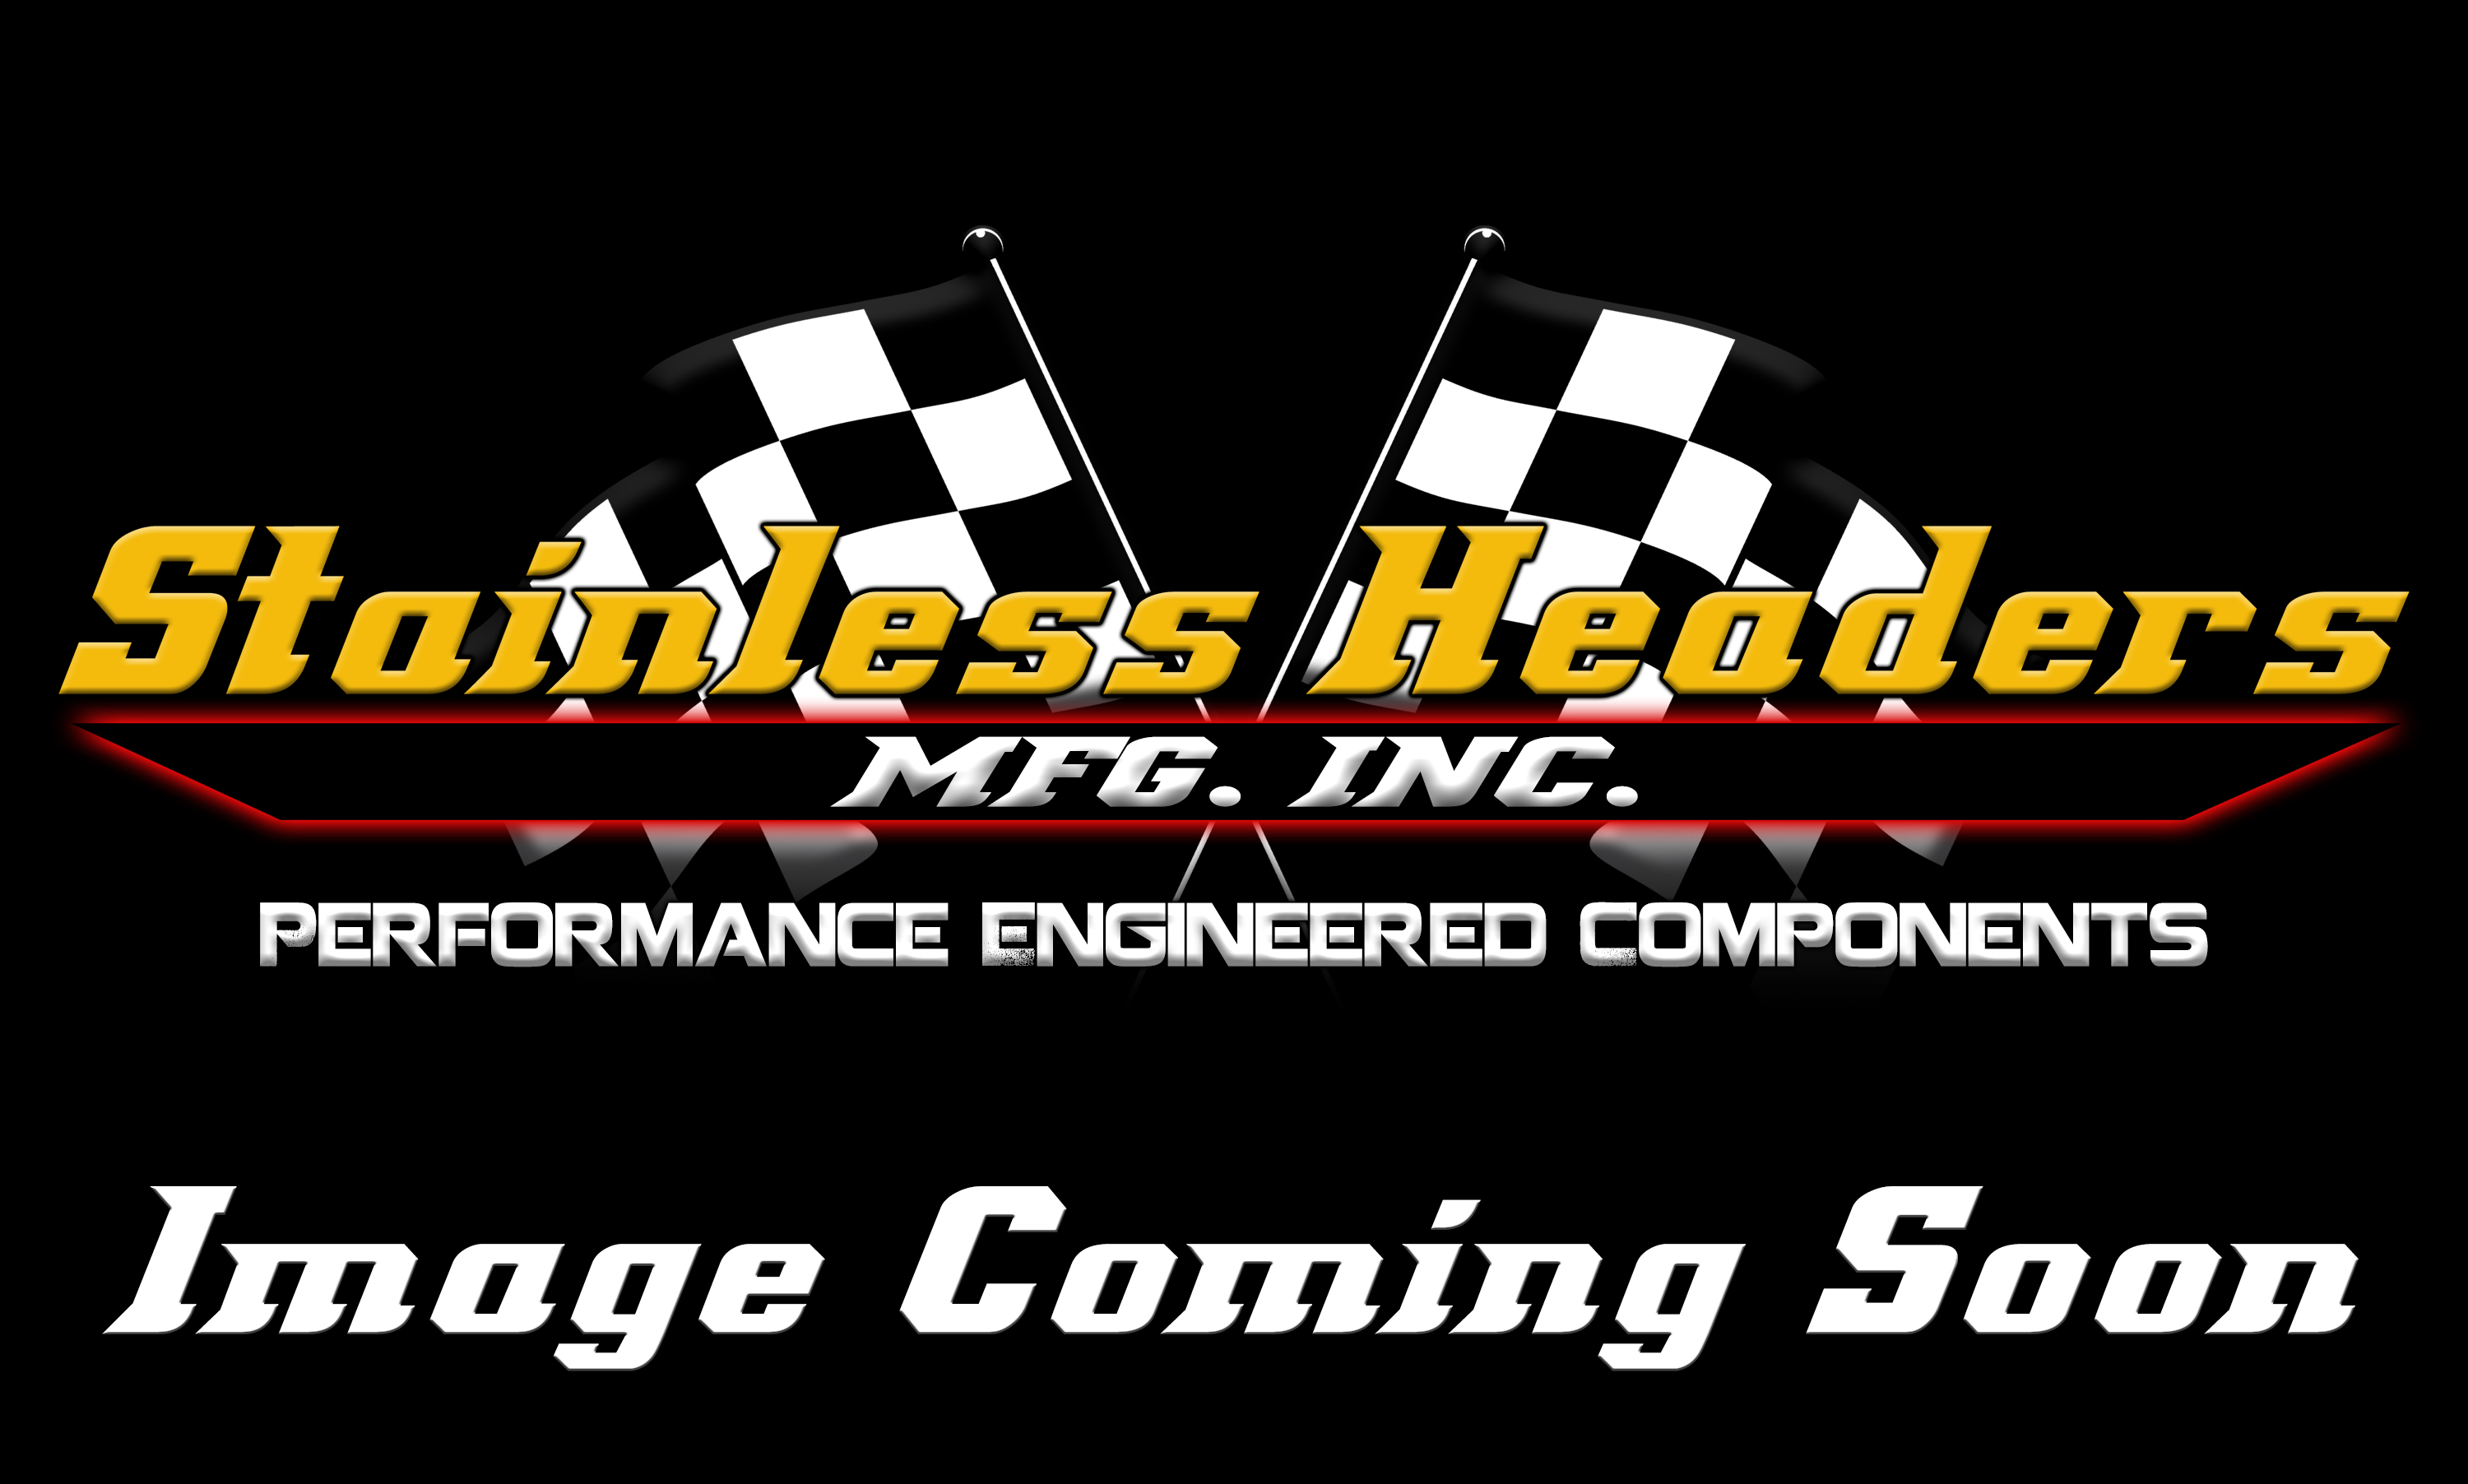 Stainless Headers - 2 3/8" Primary 3 into 1 Performance Merge Collector-16ga 321ss